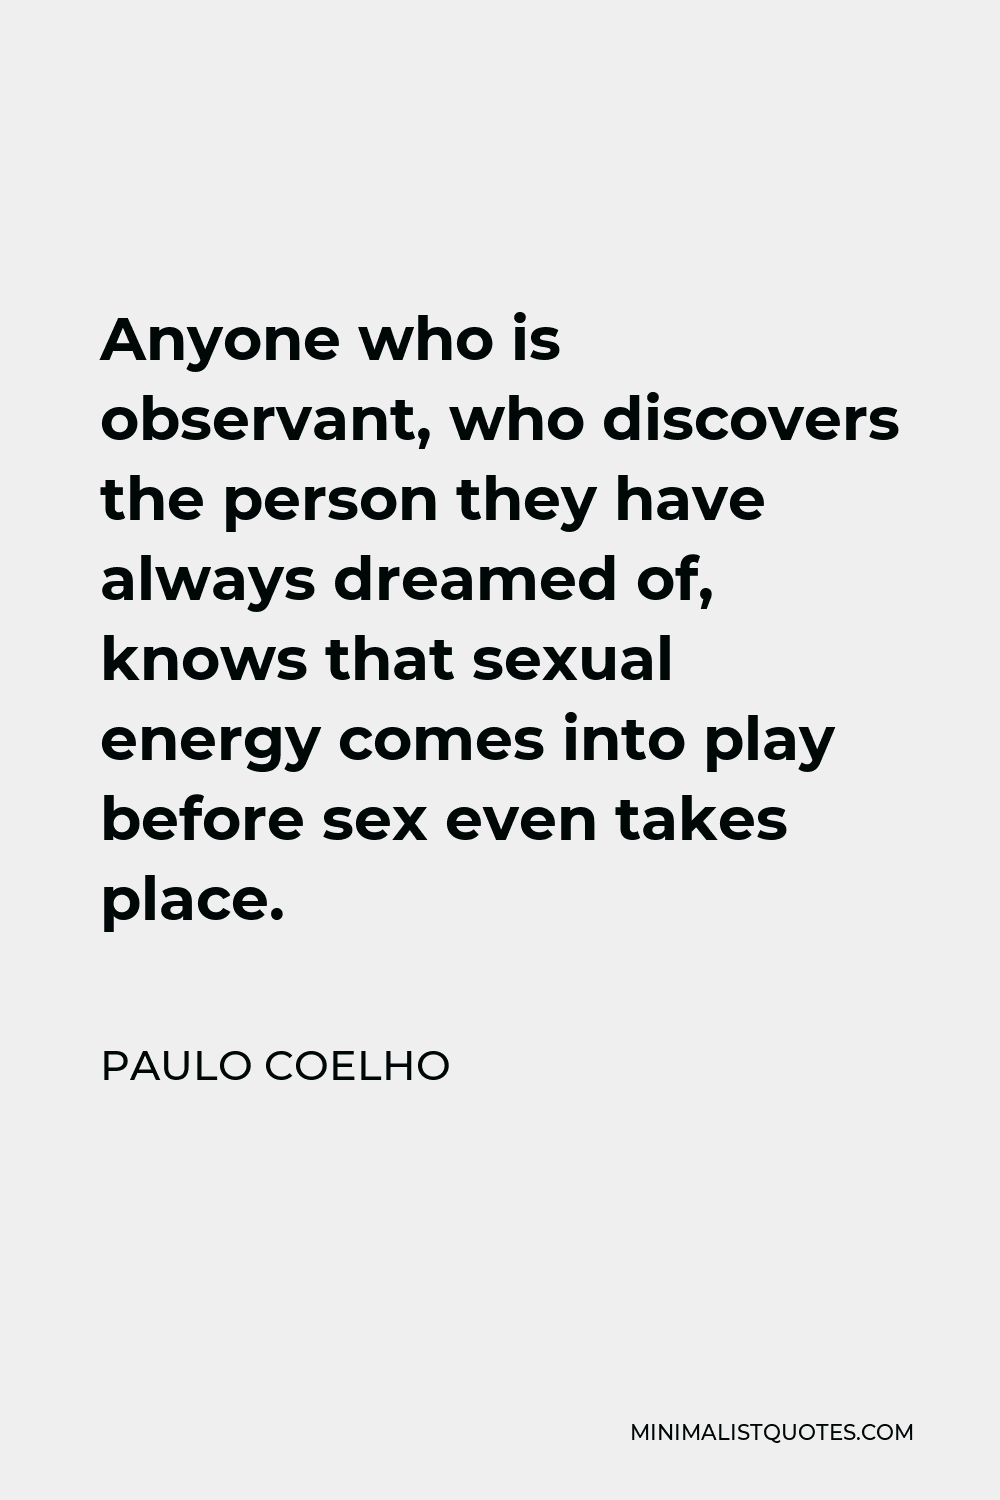 Paulo Coelho Quote - Anyone who is observant, who discovers the person they have always dreamed of, knows that sexual energy comes into play before sex even takes place.